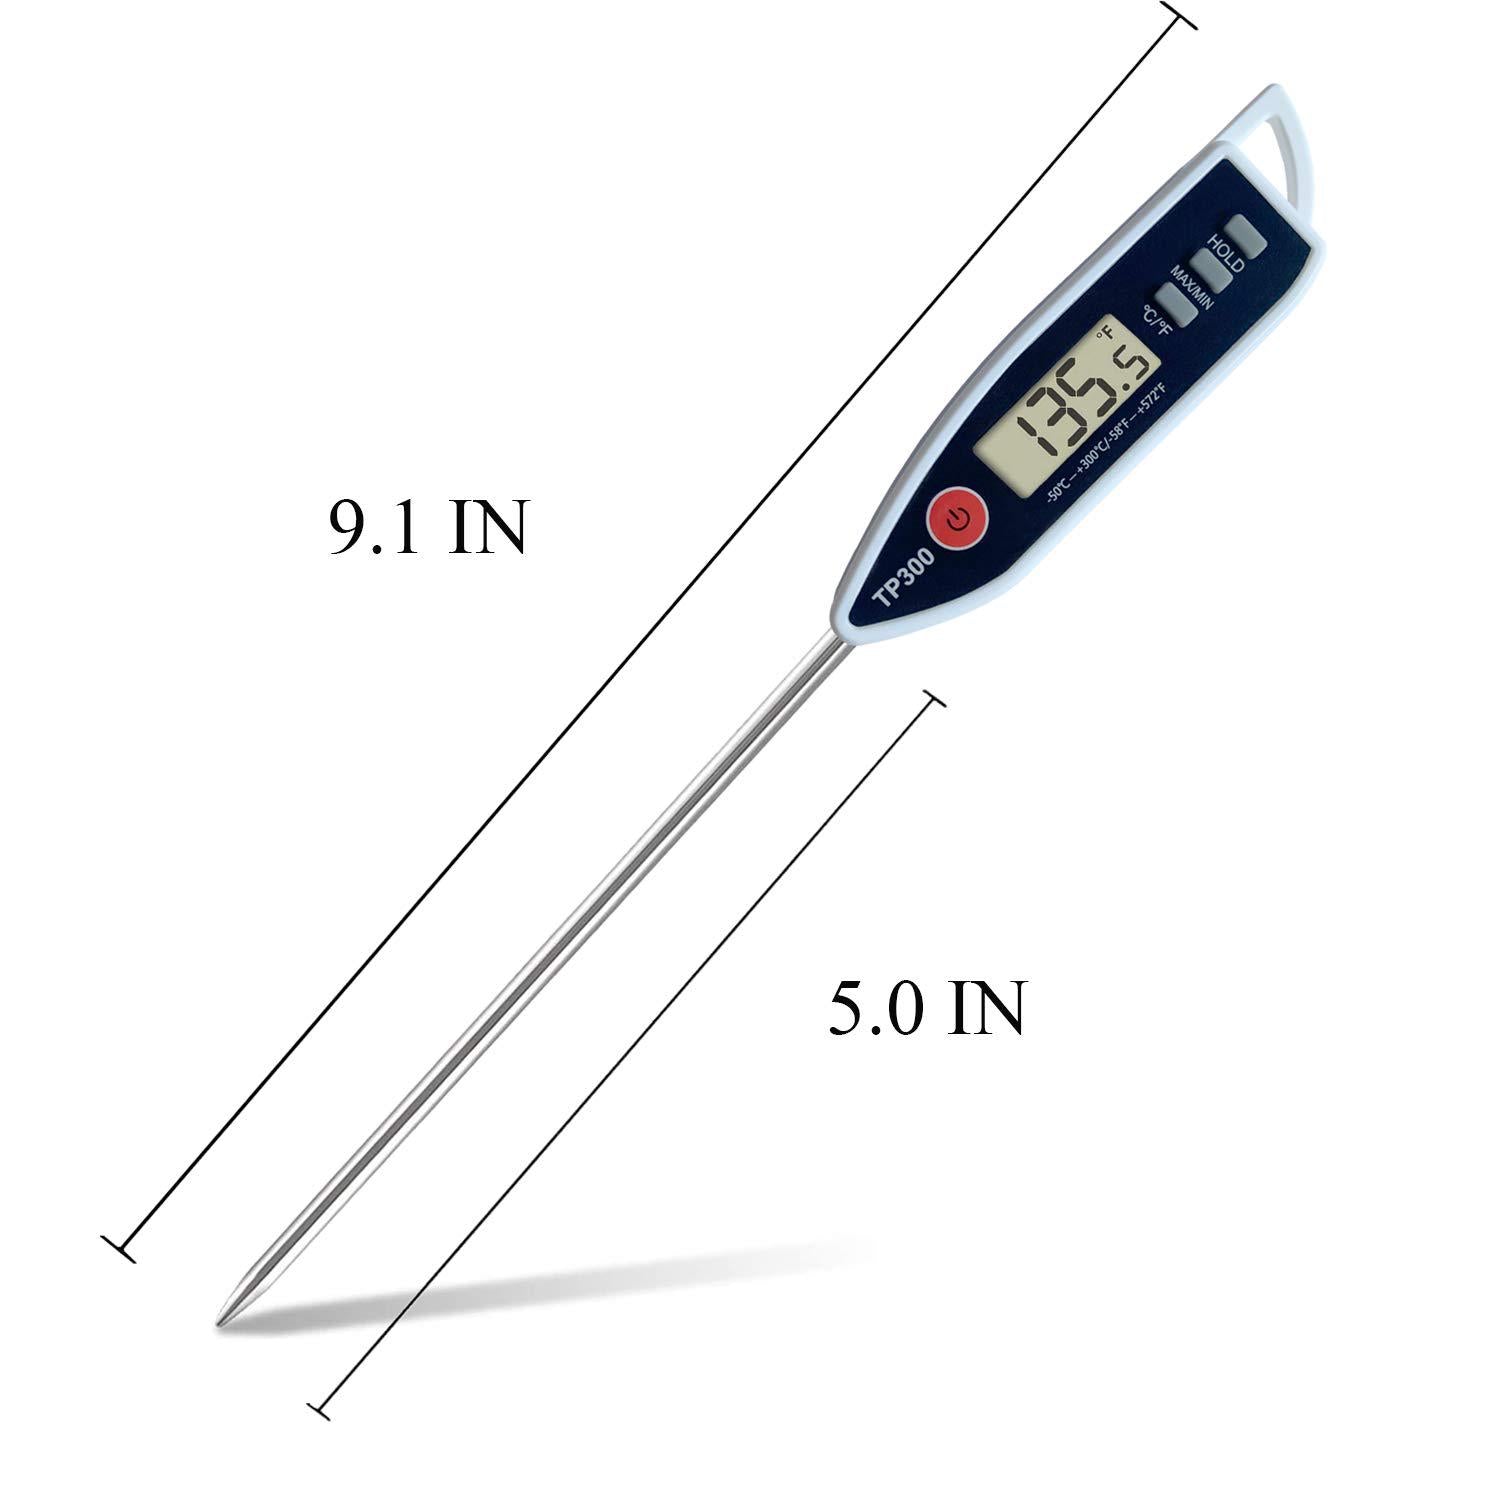 NANGOALA, Meat Food Thermometer, Digital Candy Candle Thermometer, Cooking Kitchen BBQ Grill Thermometer, Probe Instant Read Thermometer for Liquids Pork Milk Deep Fry Roast Baking Candle Temperature